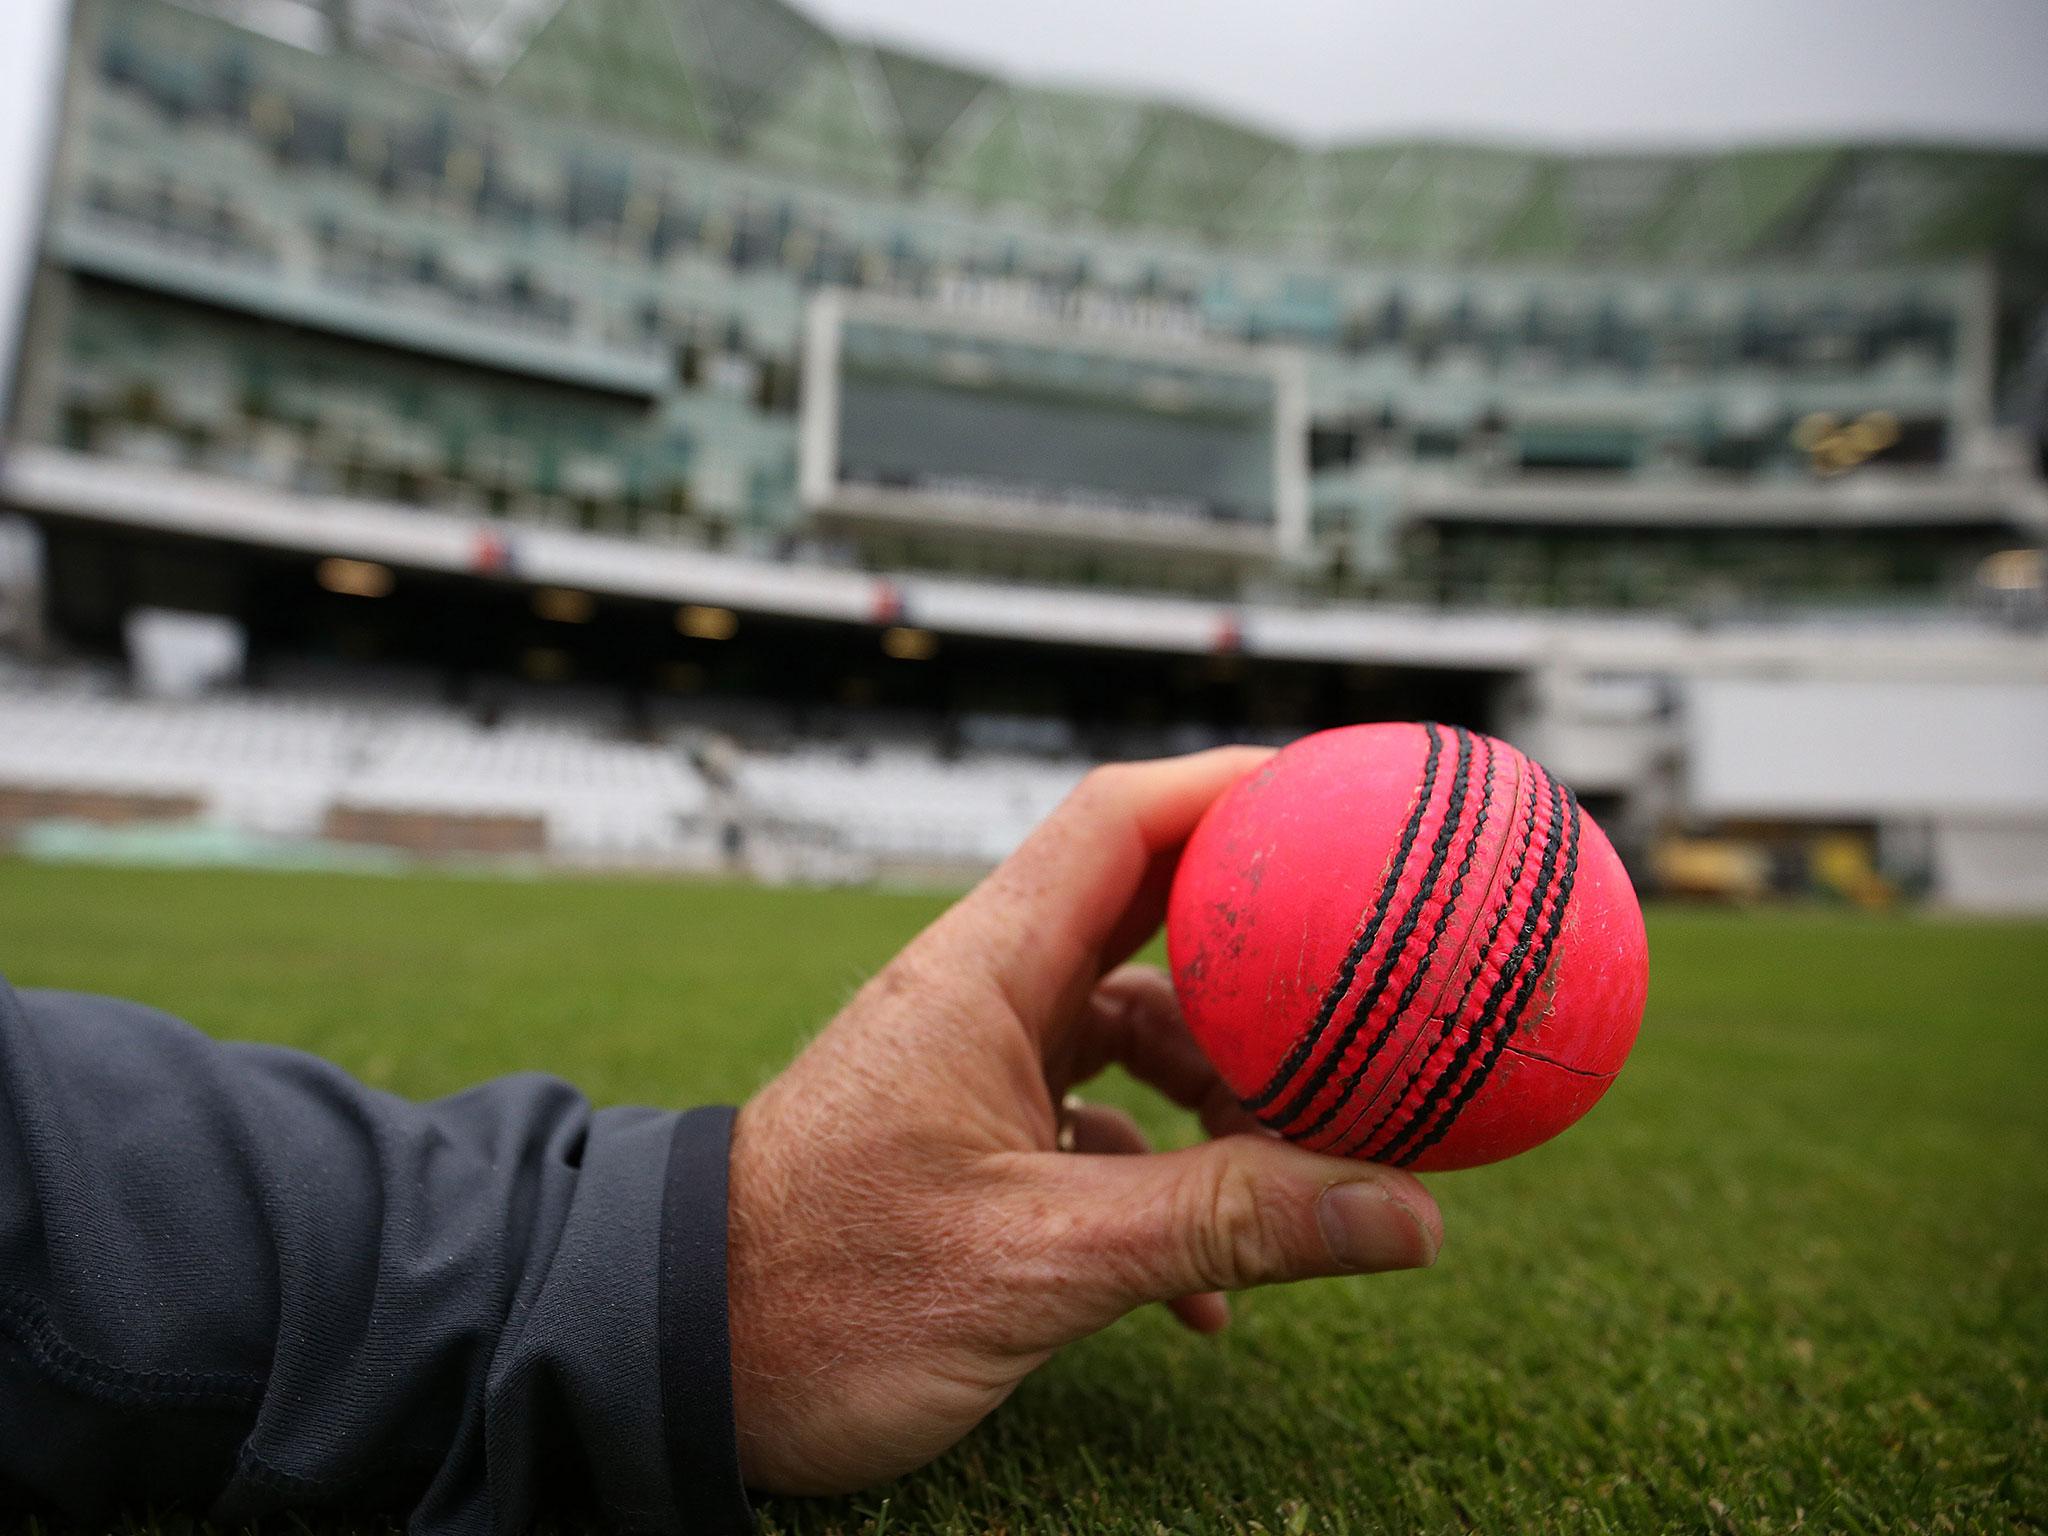 The pink ball has sparked a war of words both at home and Down Under